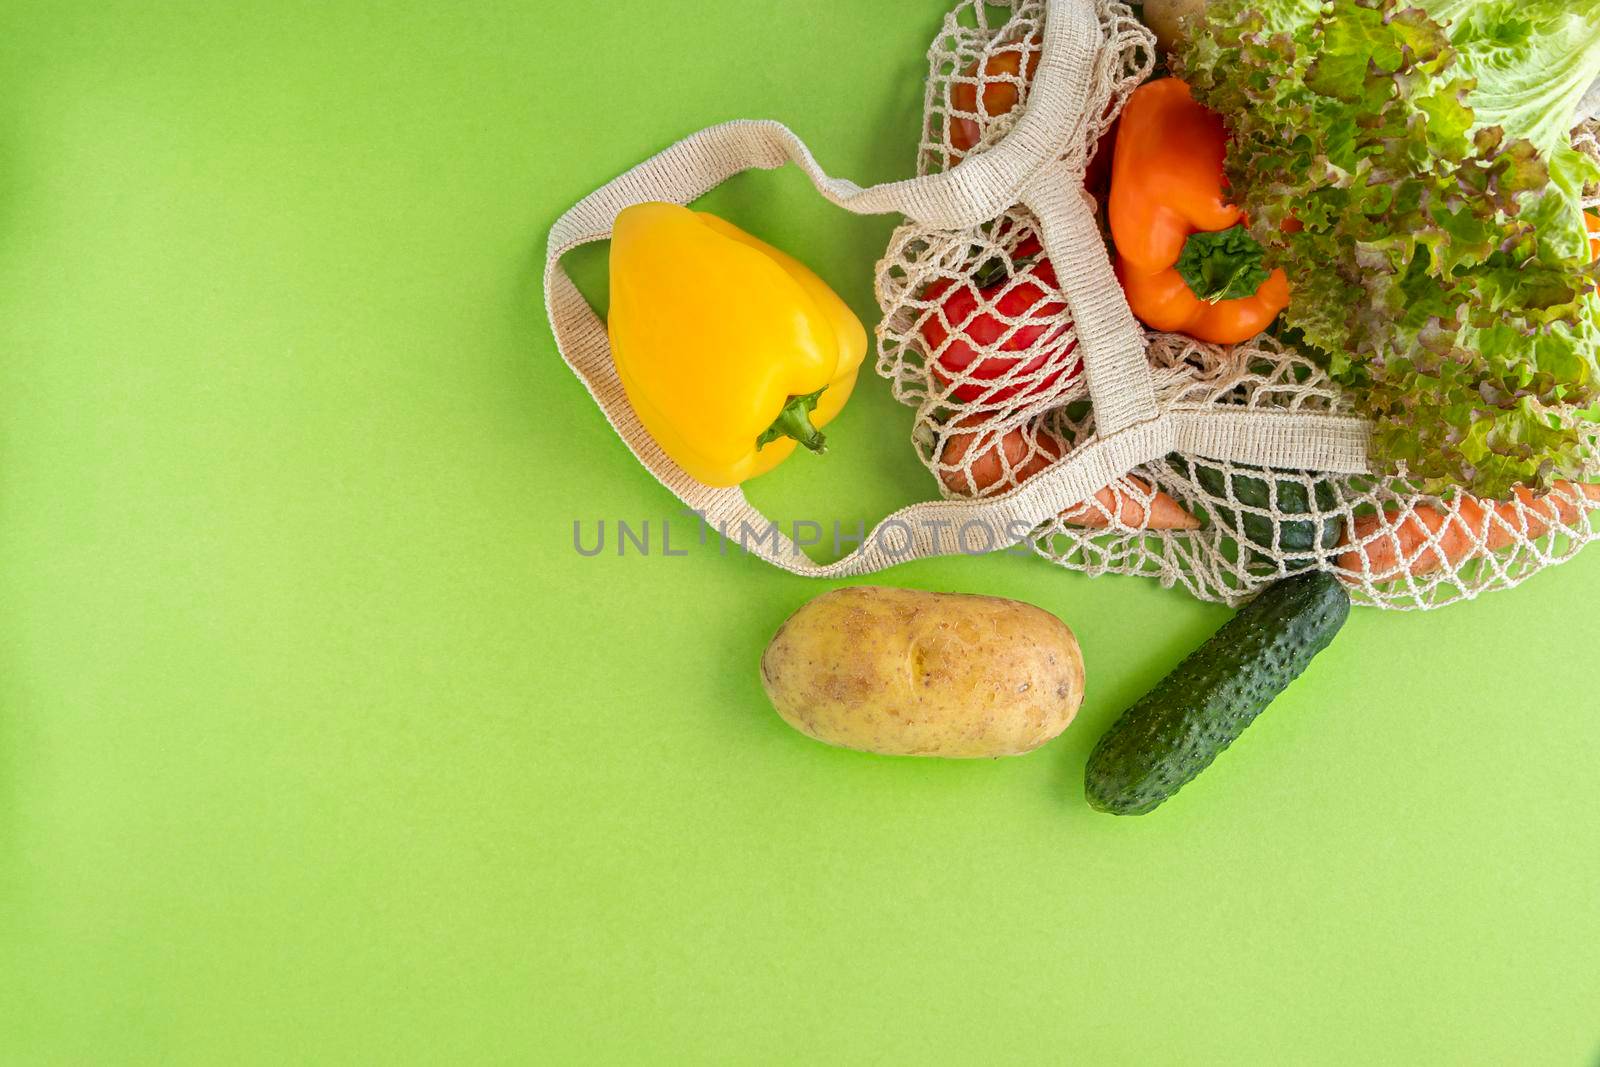 Package-free food shopping. top view of eco friendly natural bag with vegetables. Zero waste concept. Sustainable lifestyle concept. Plastic free items. Flat lay. by Leoschka